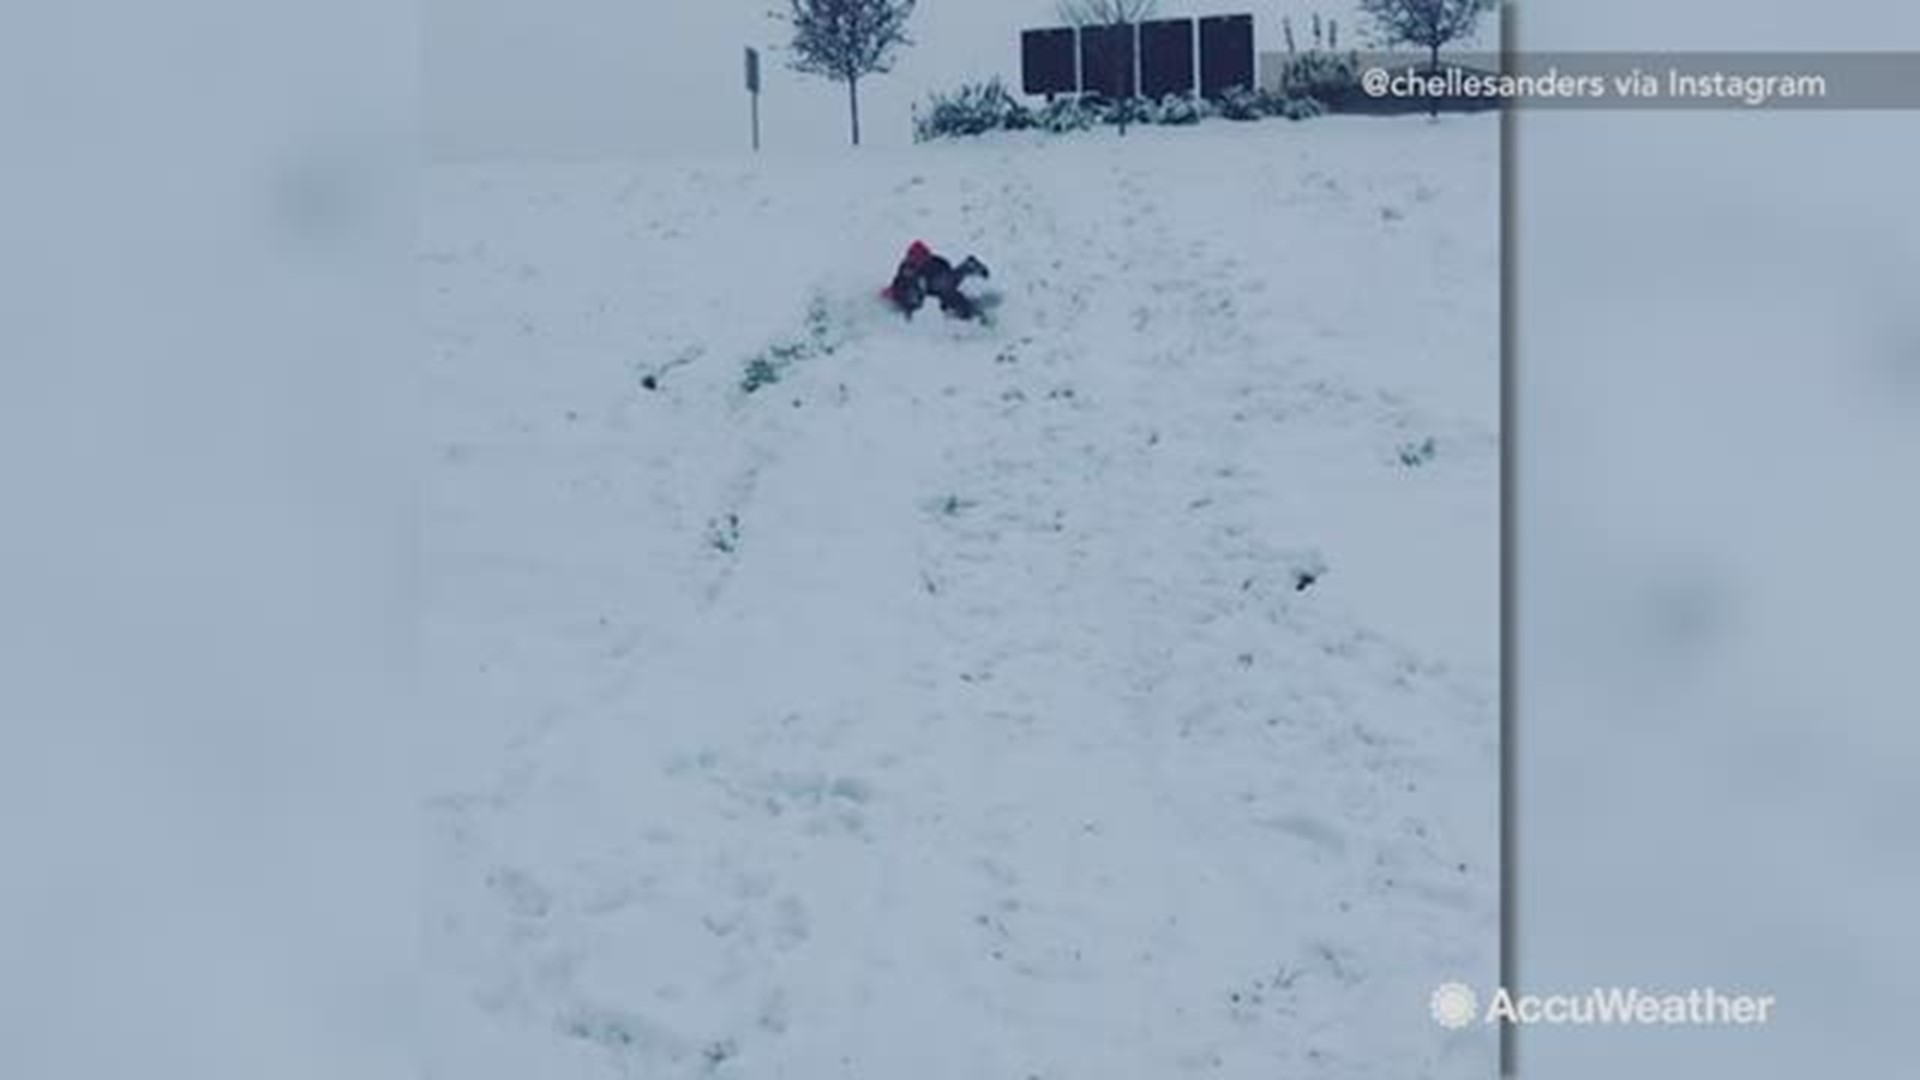 Watch as a mom and her child tumble down a freshly snowed hill in St. Louis, Missouri.